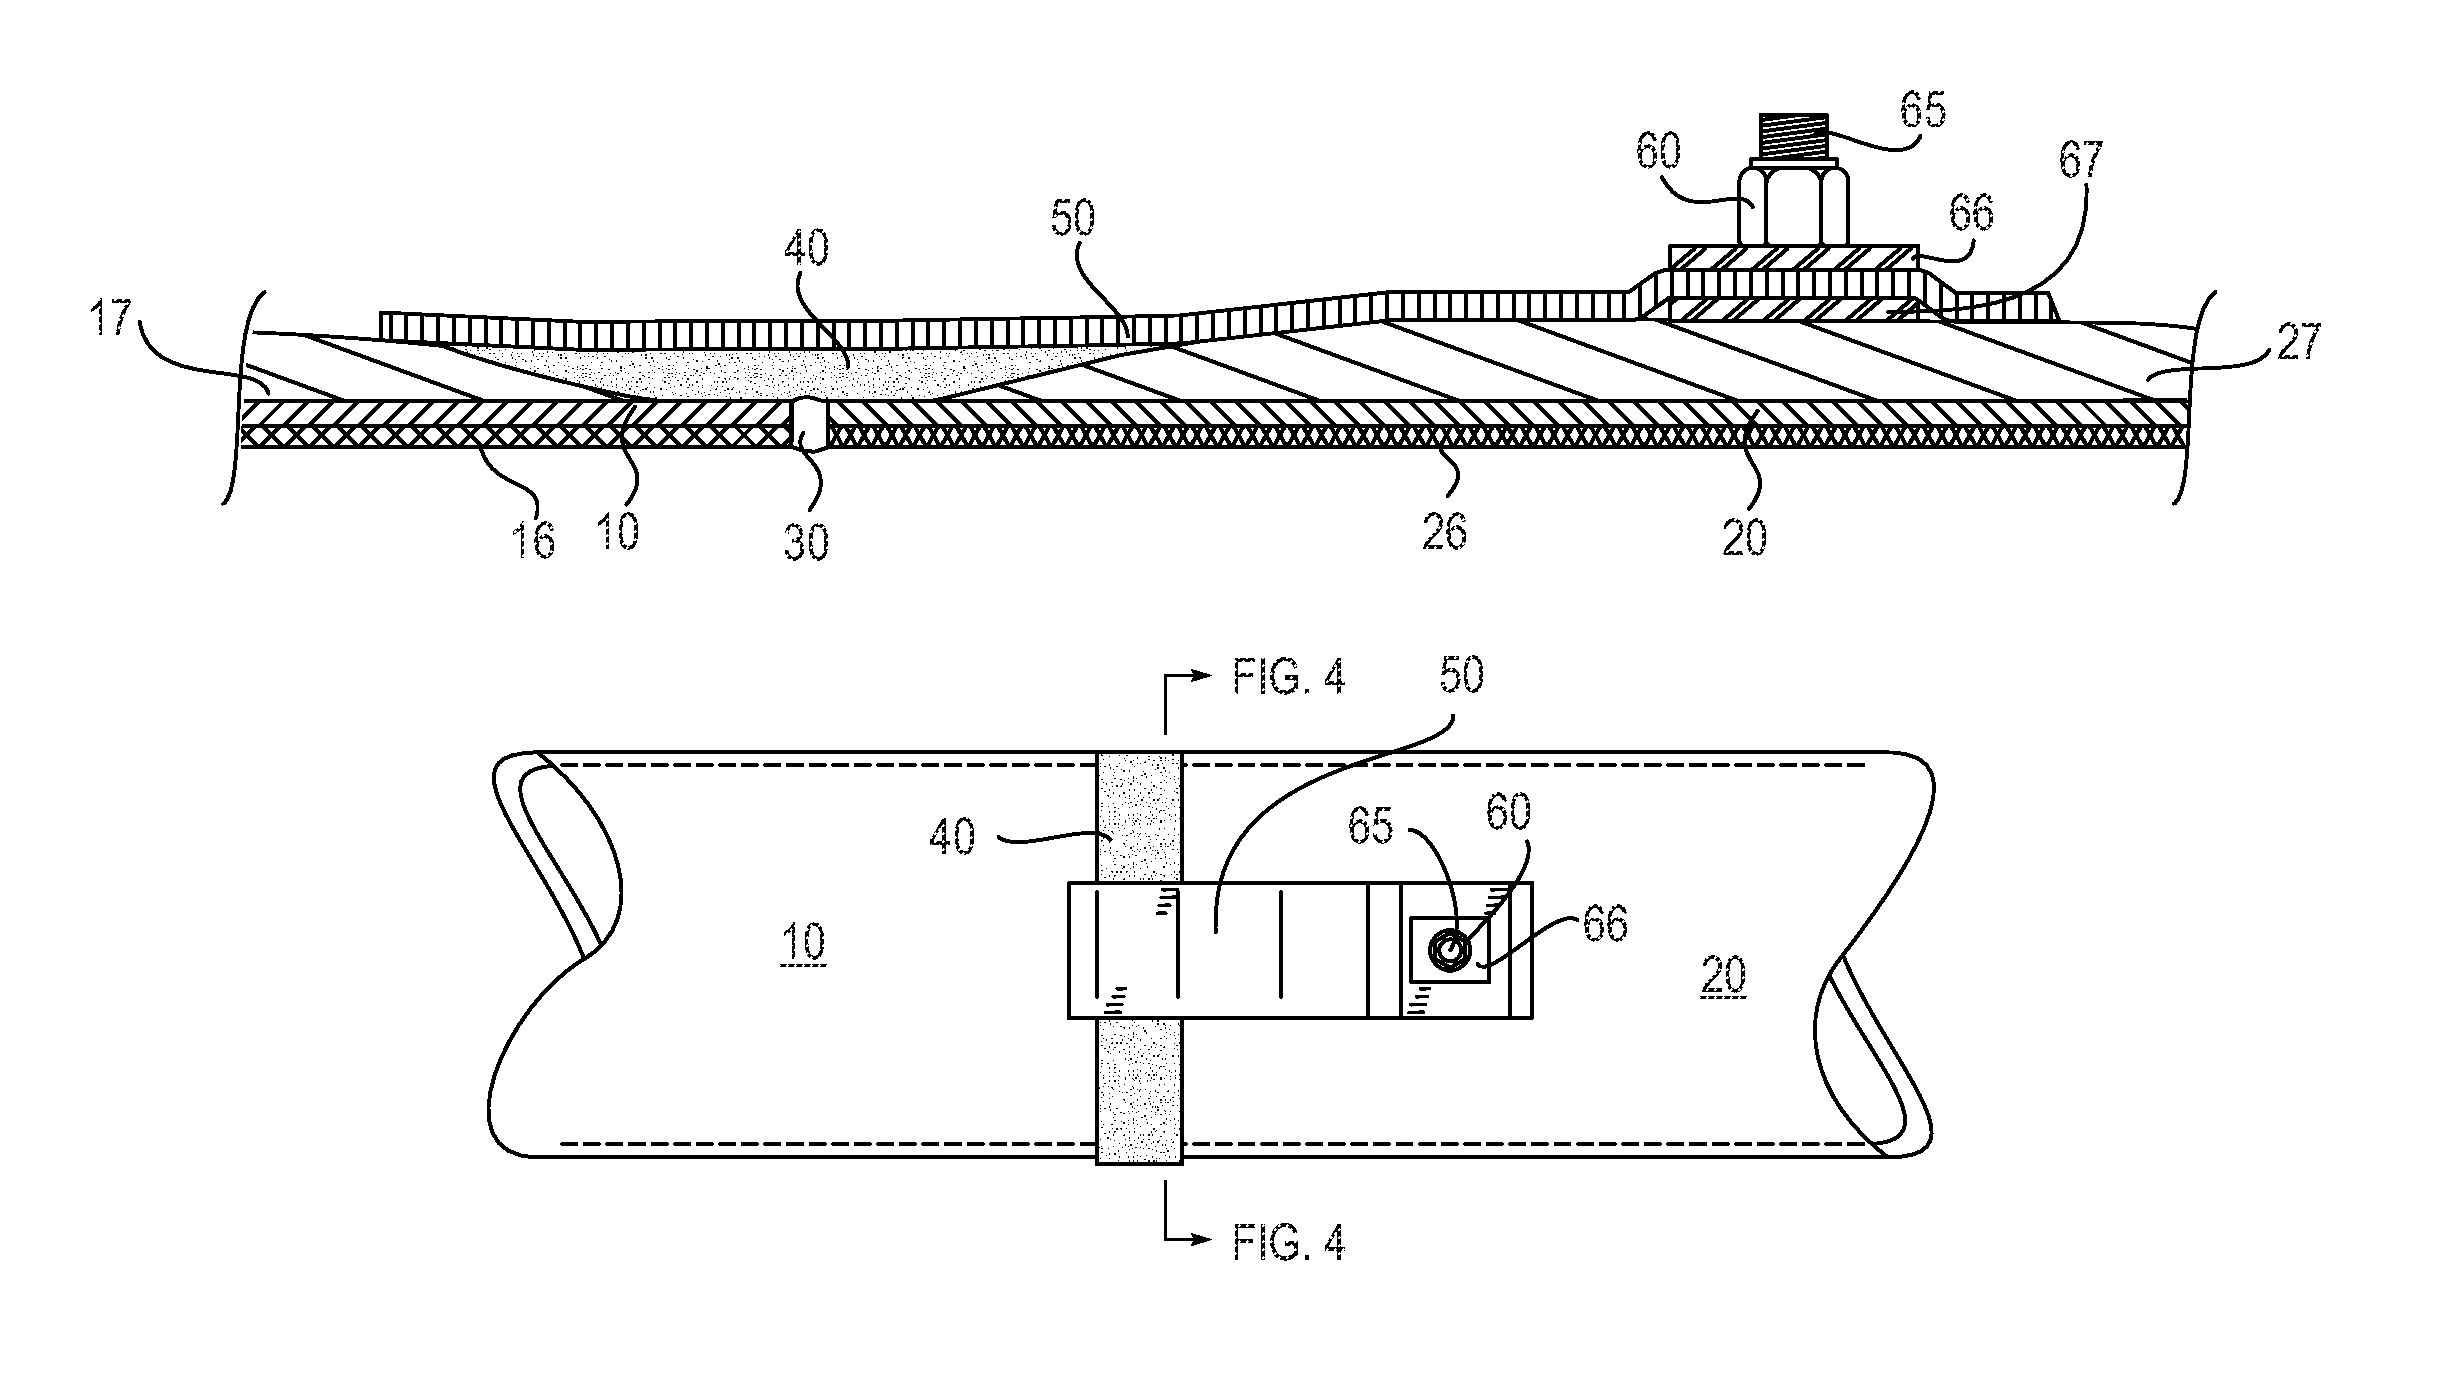 Static dissipation in composite structural components